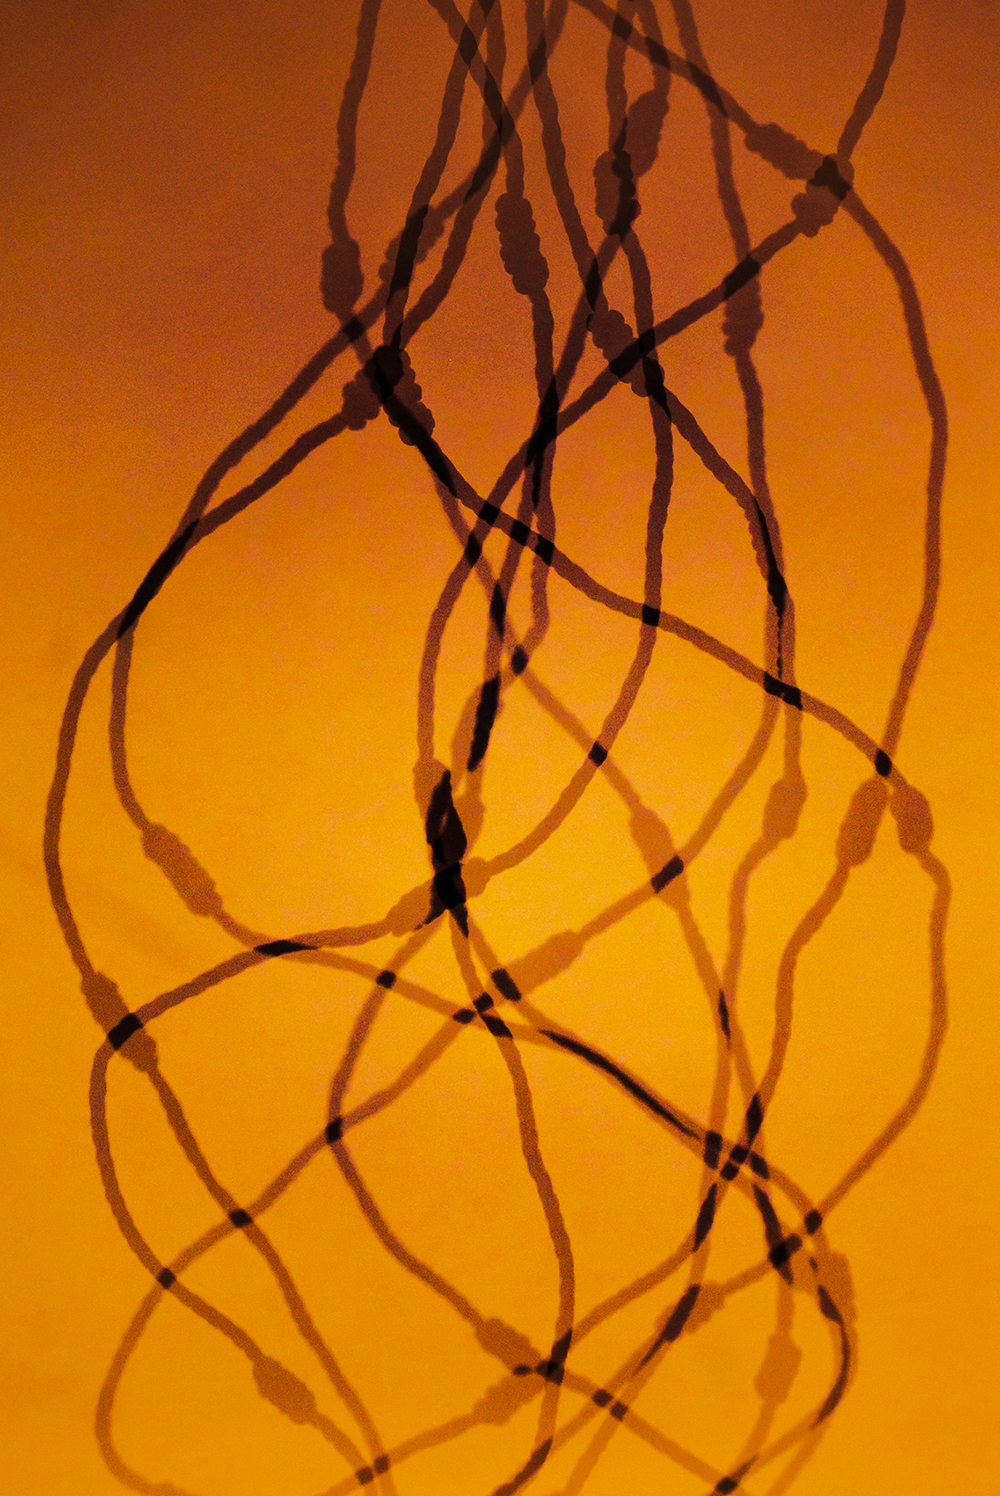 Shadows of string make the appearance of movement.